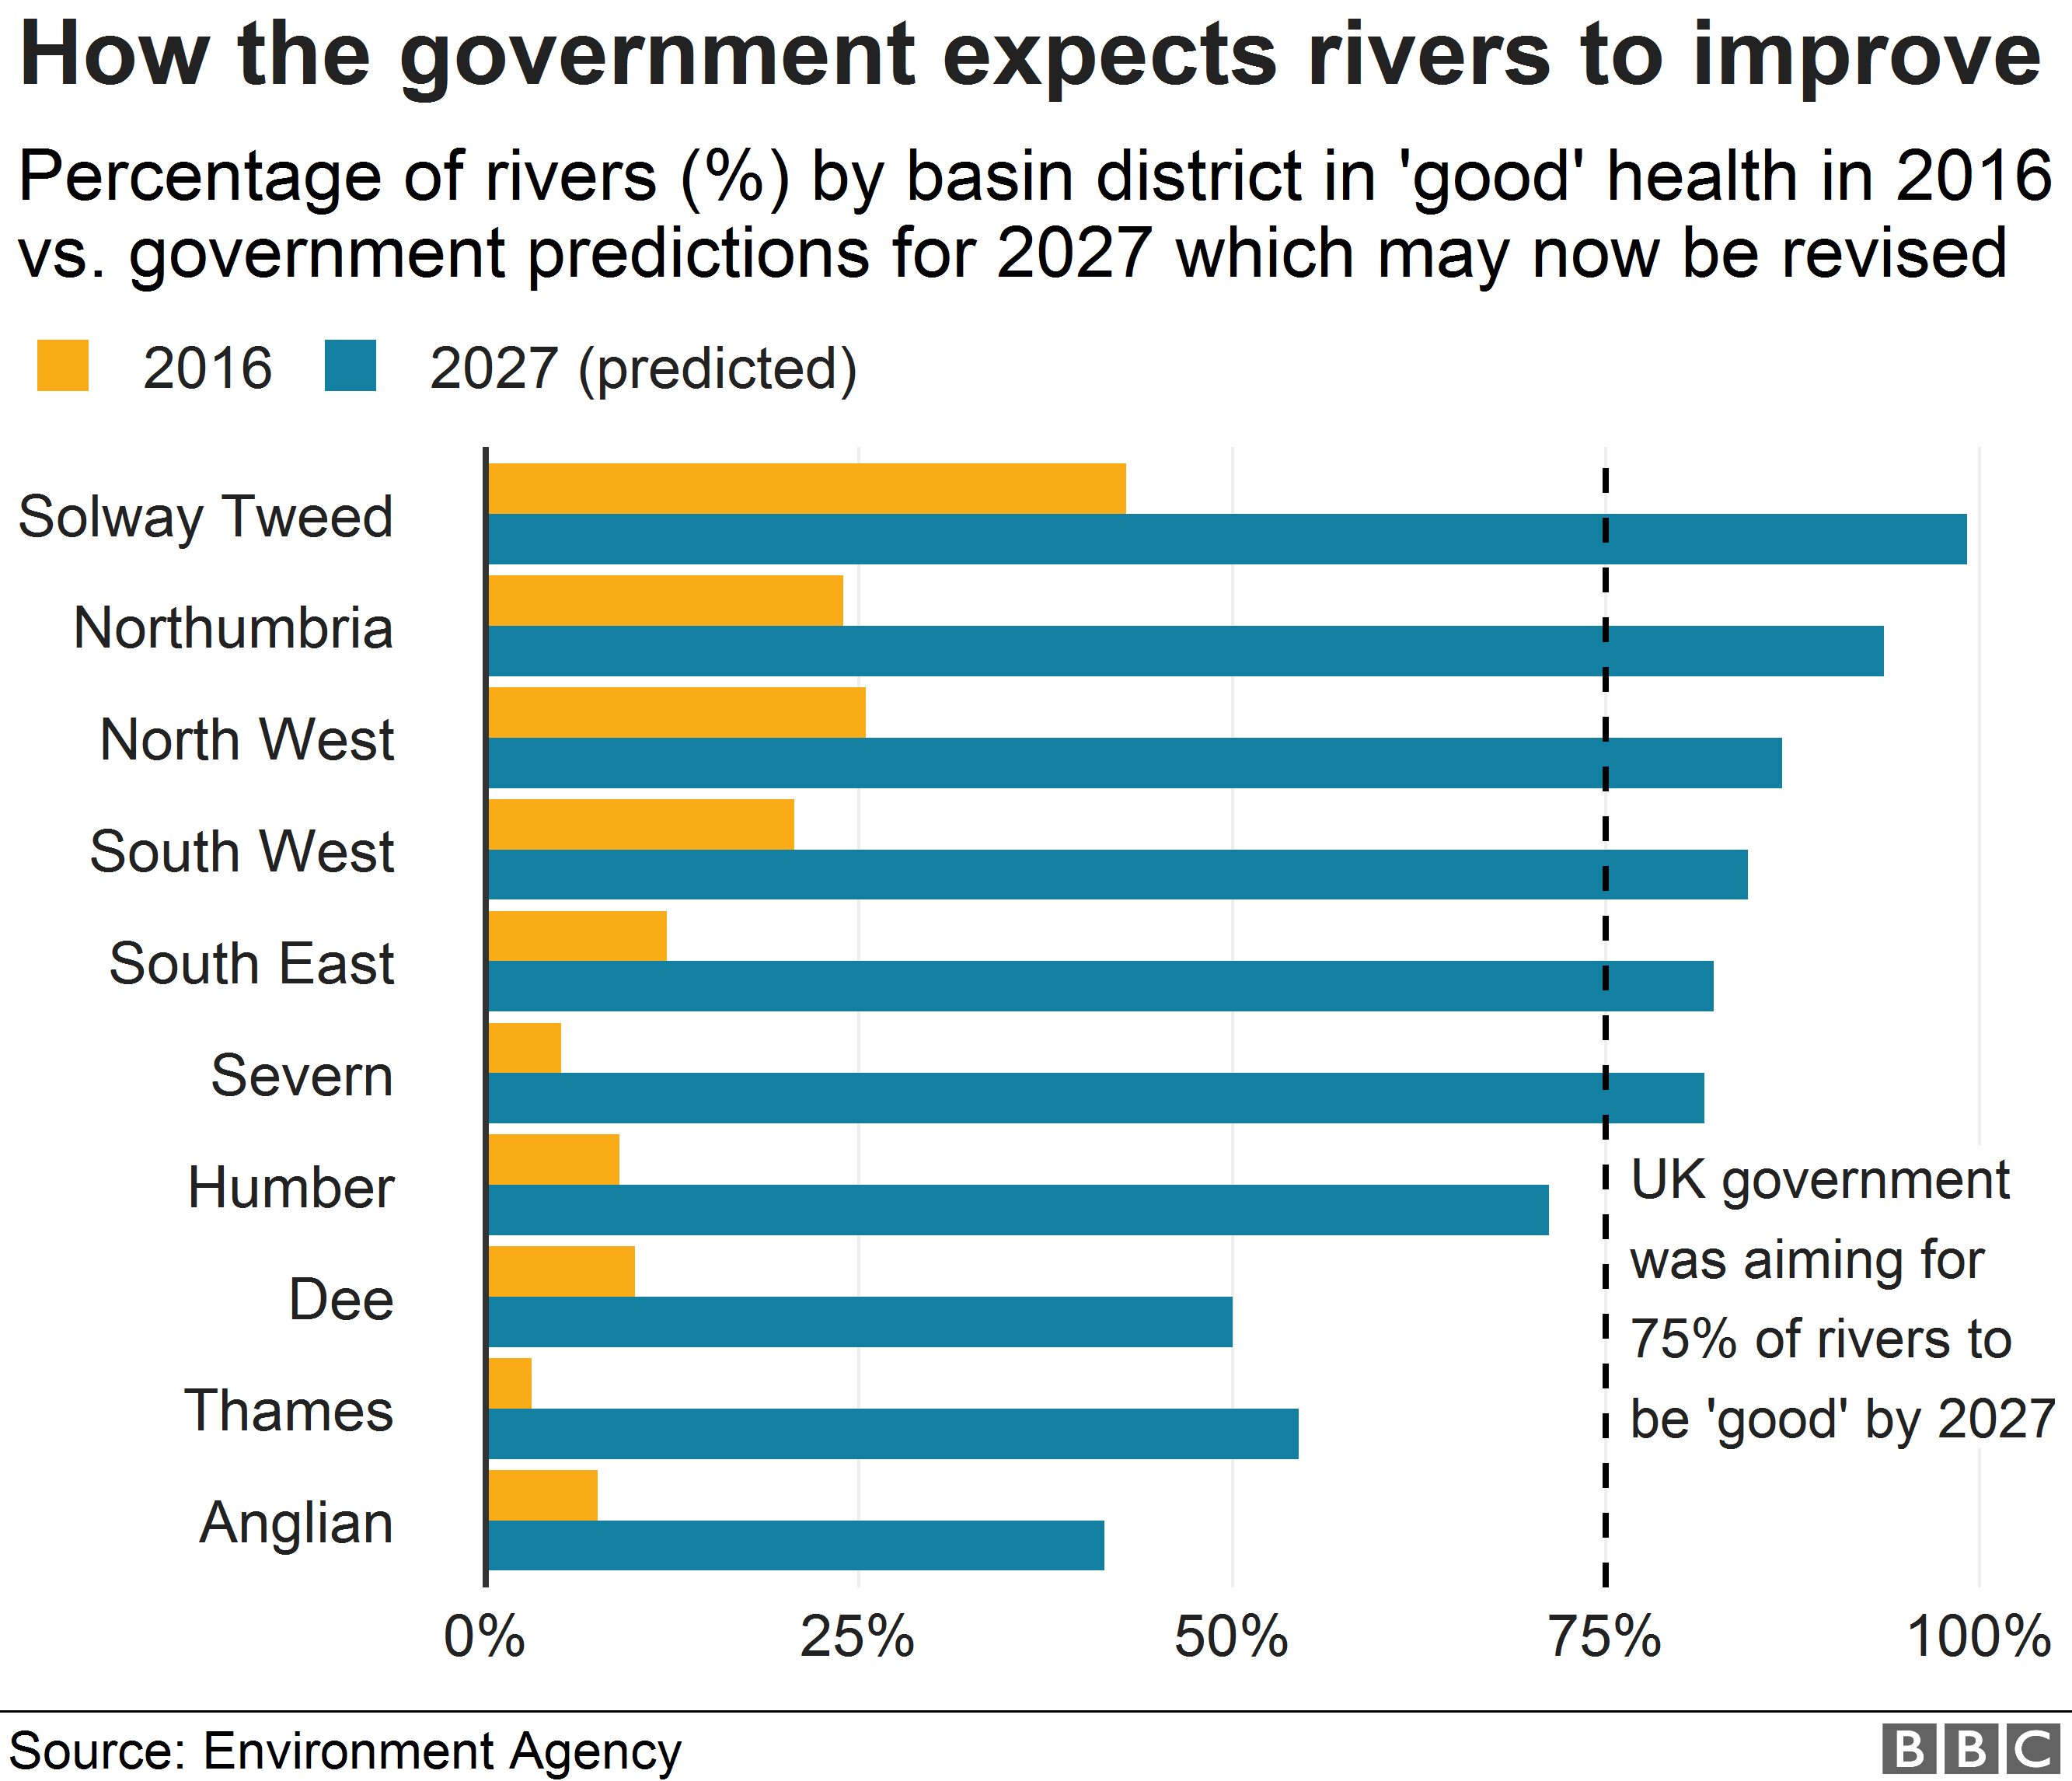 Chart showing river status in 2016 and predicted status in 2027